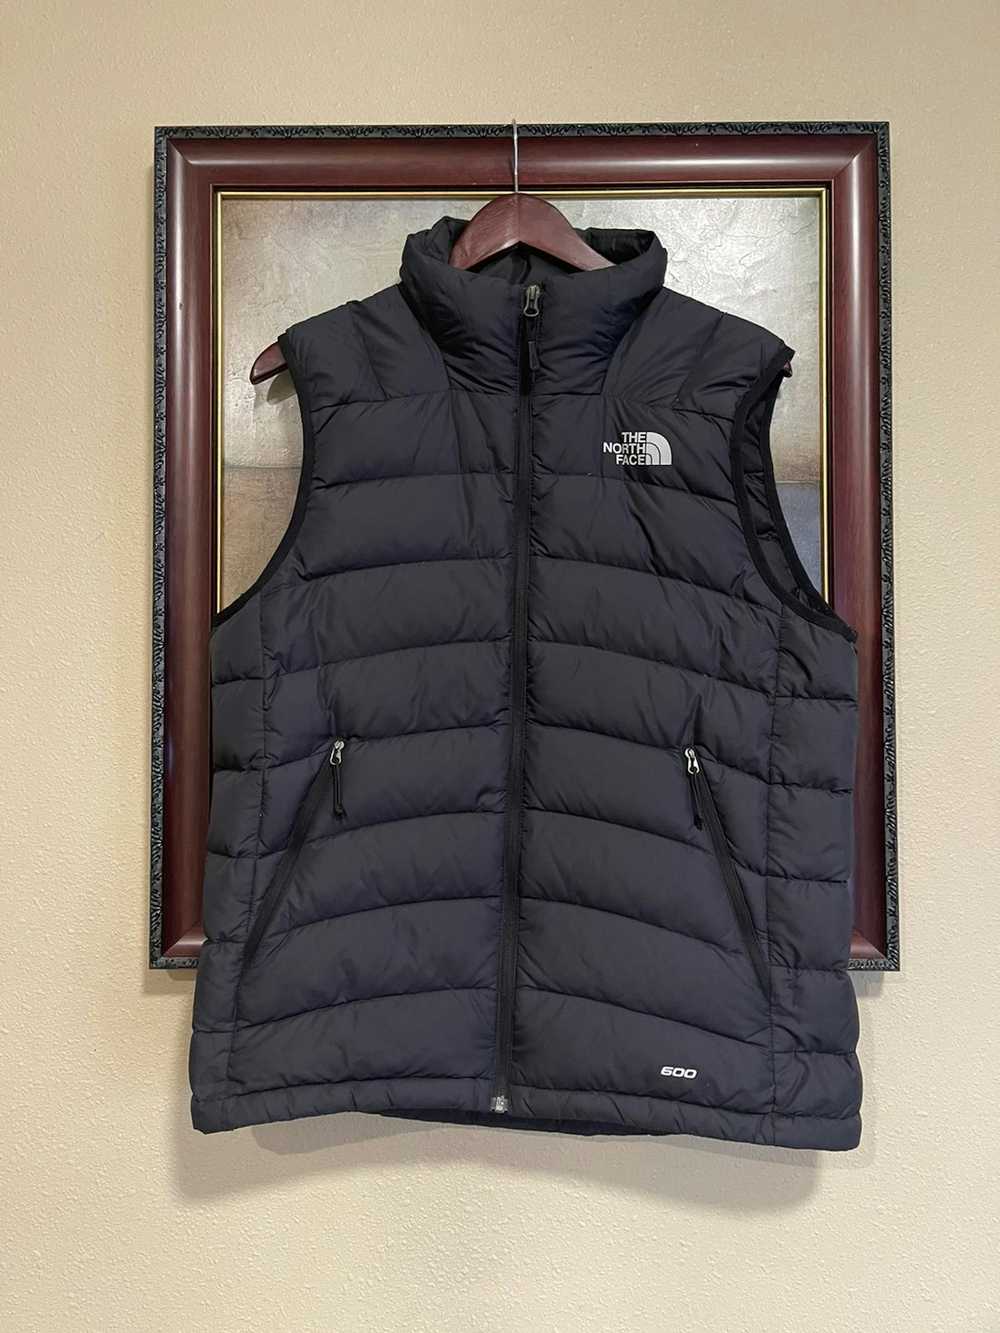 The North Face The north face men’s vest M - image 1